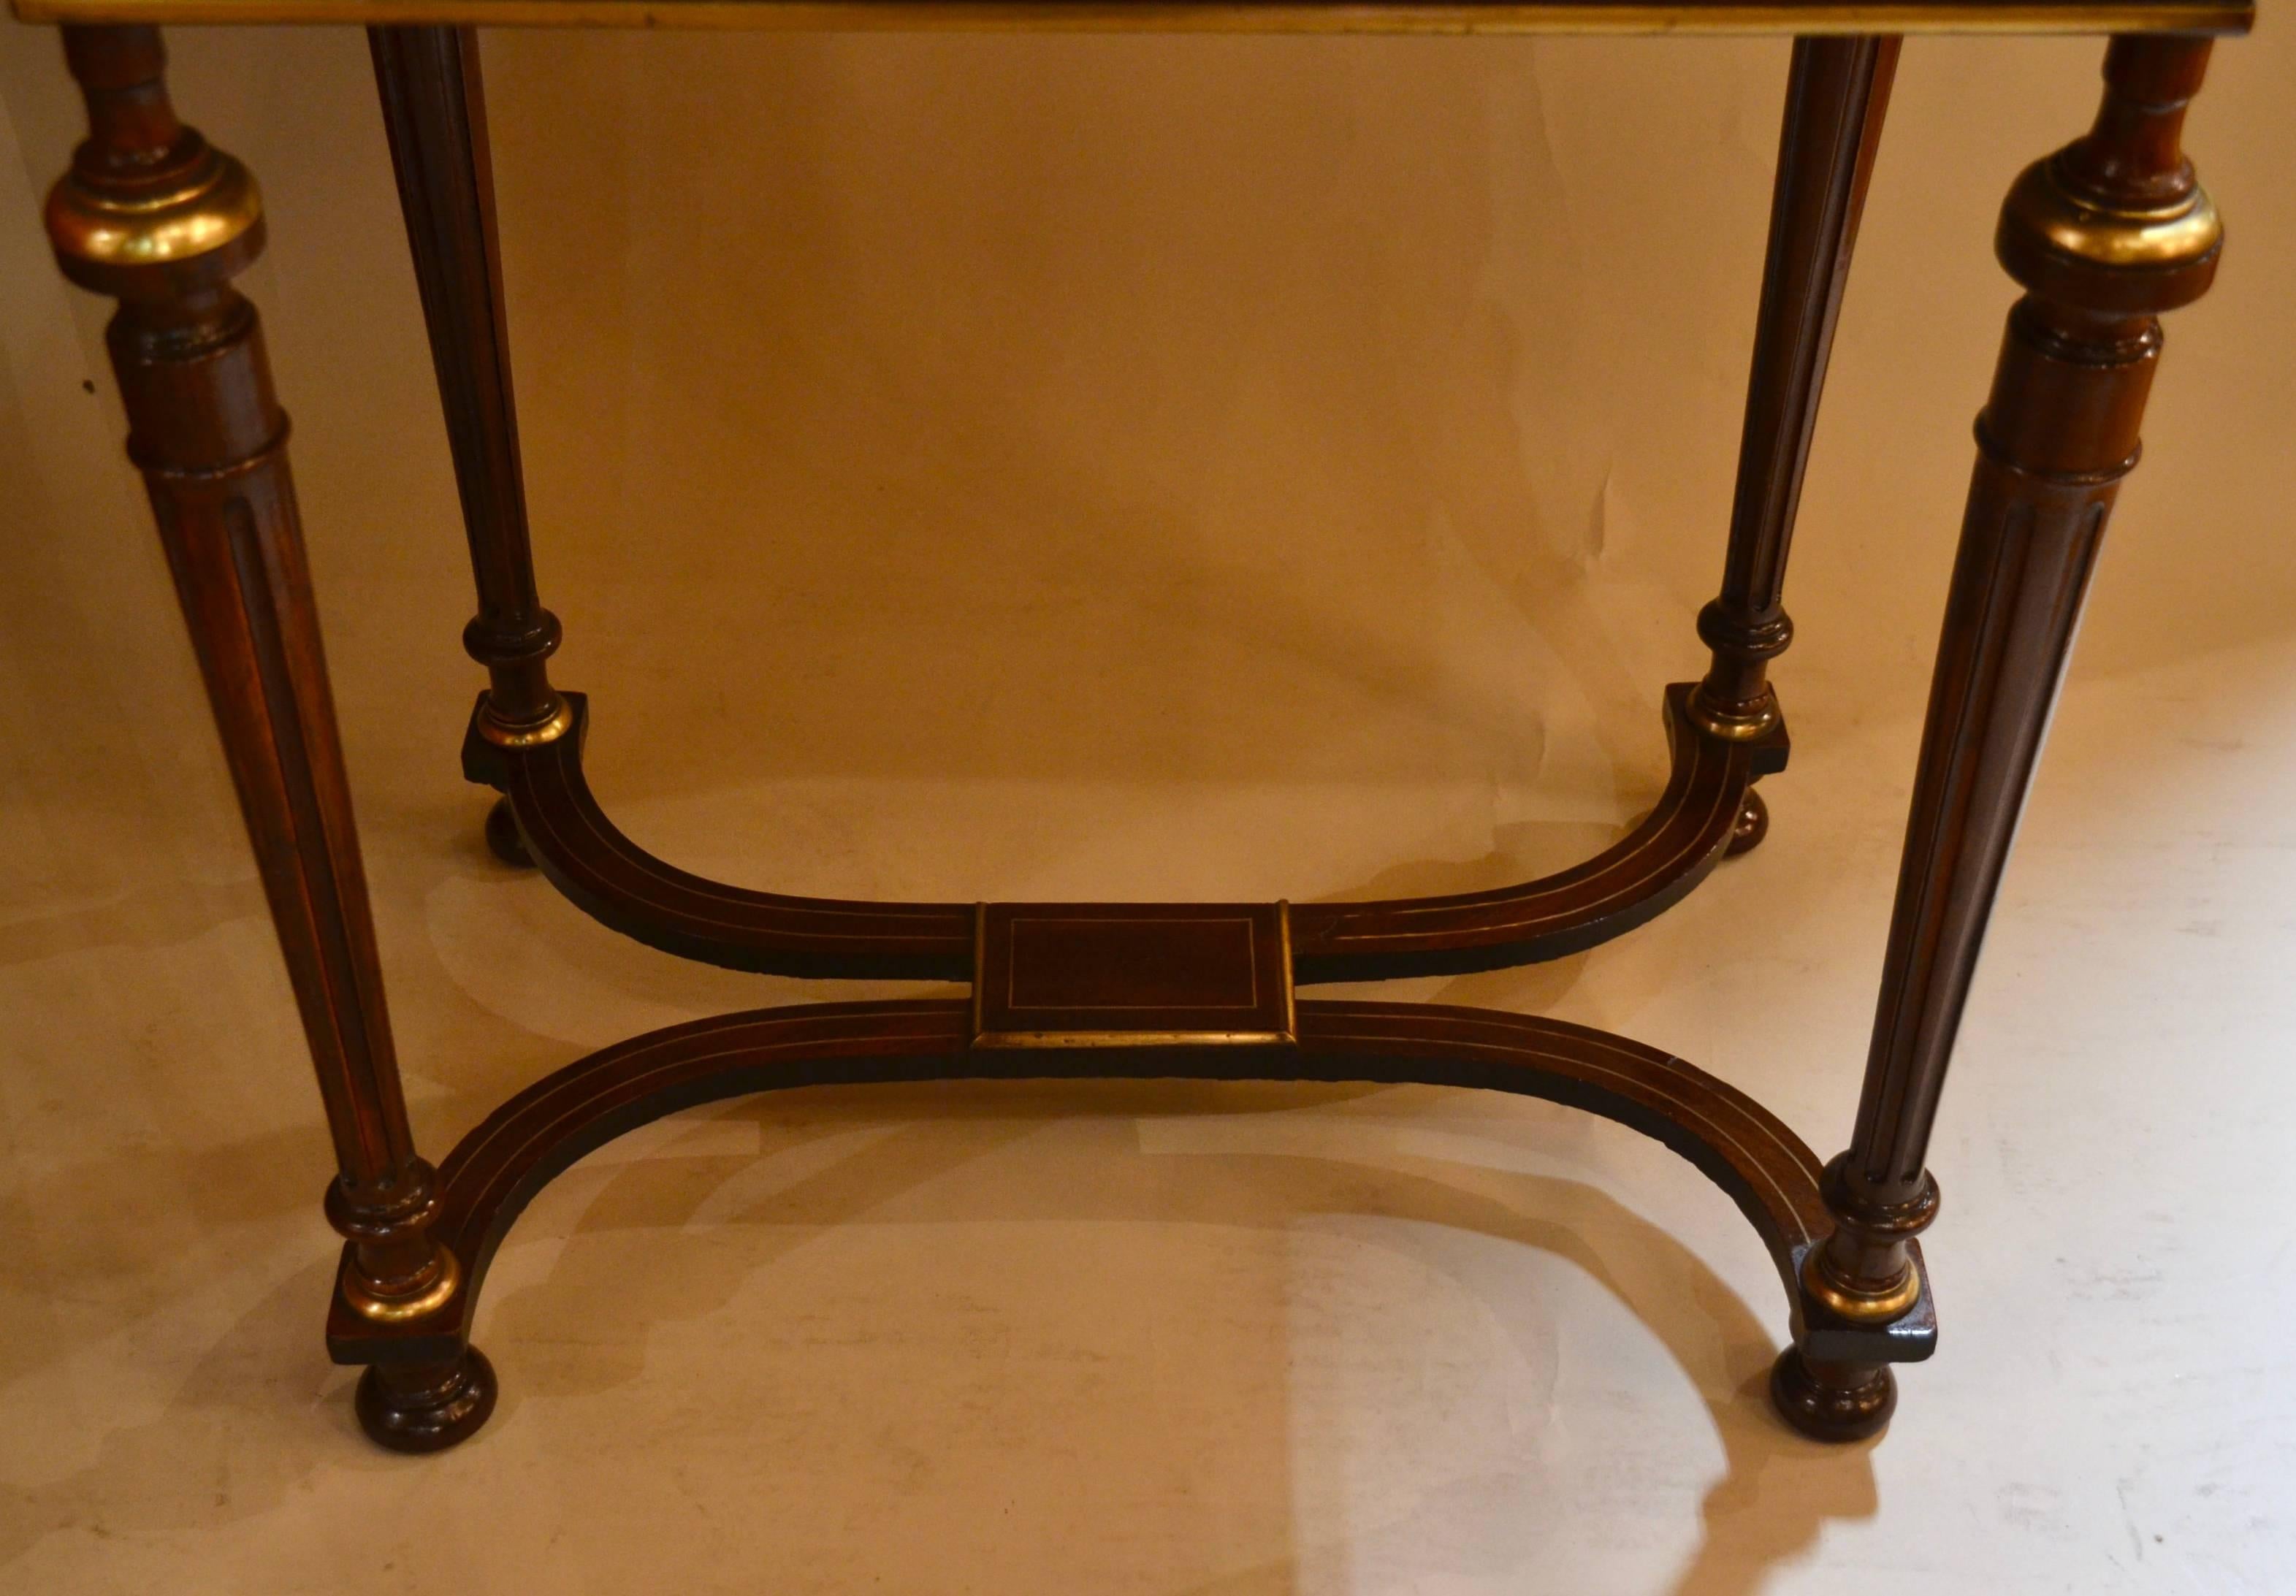 Antique French Poudreuse Vanity Table with Gold Bronze Detail, circa 1860-1870 For Sale 2